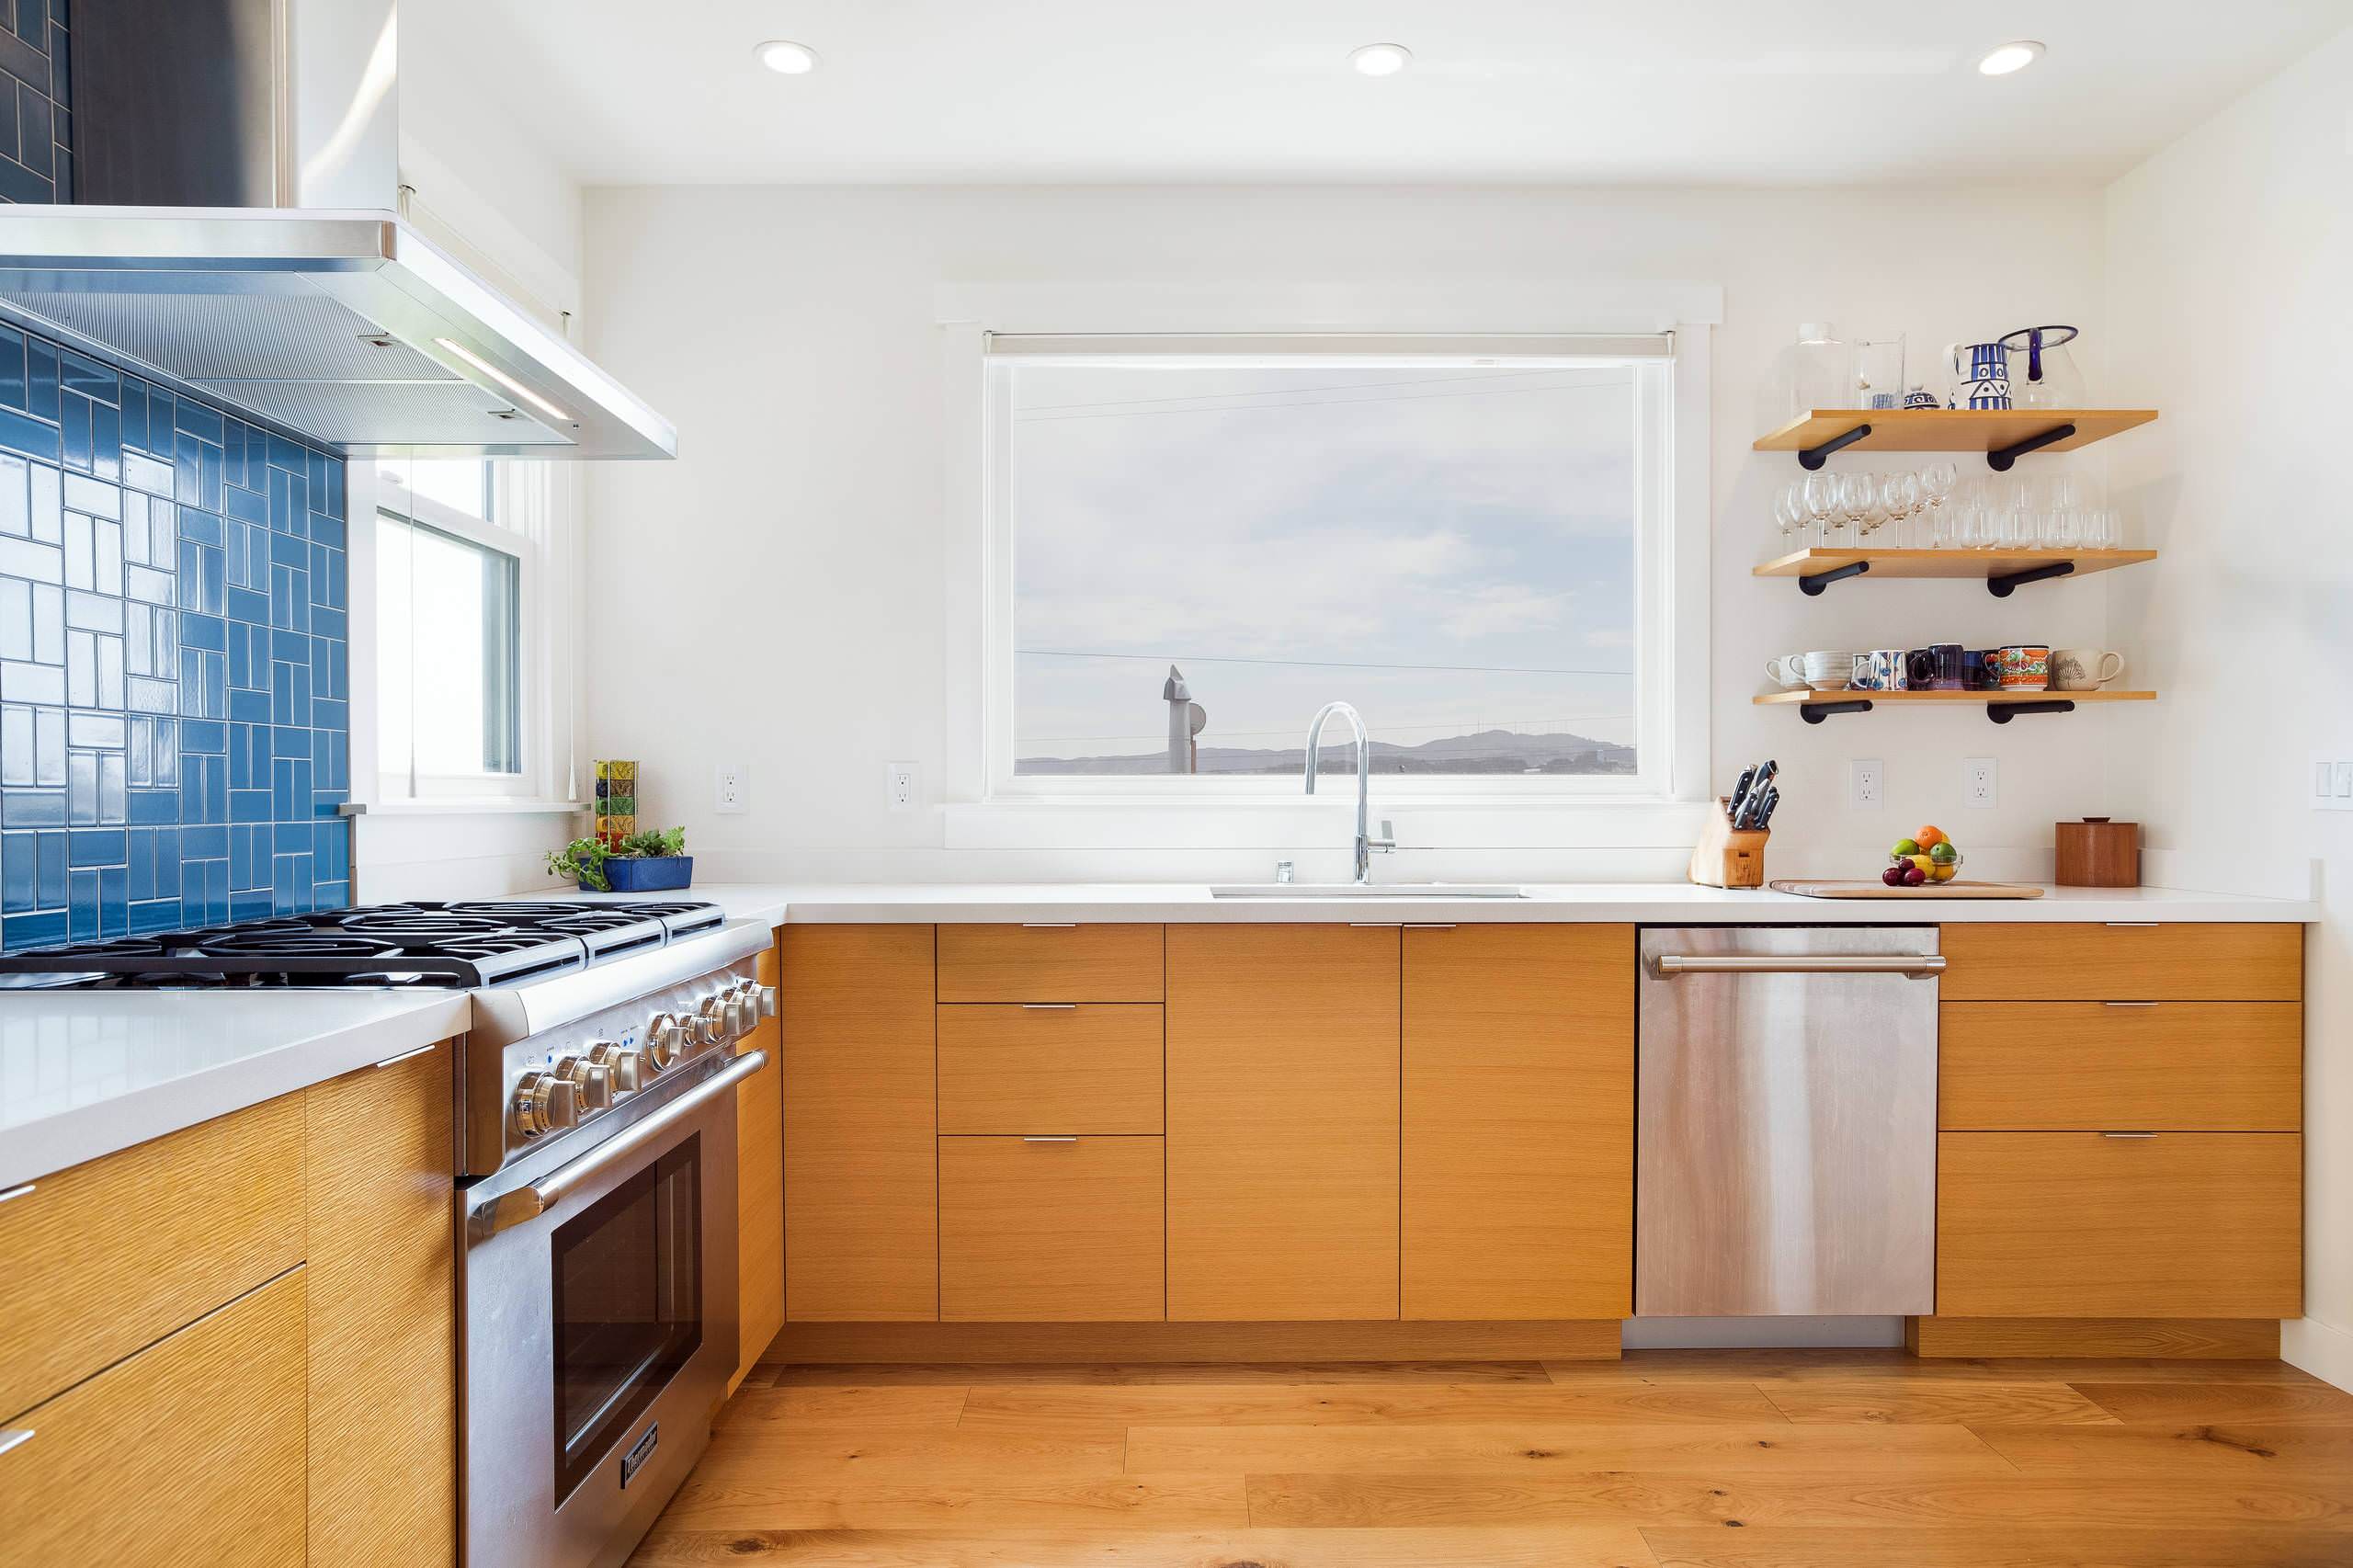 Bernal Heights Remodel and Addition